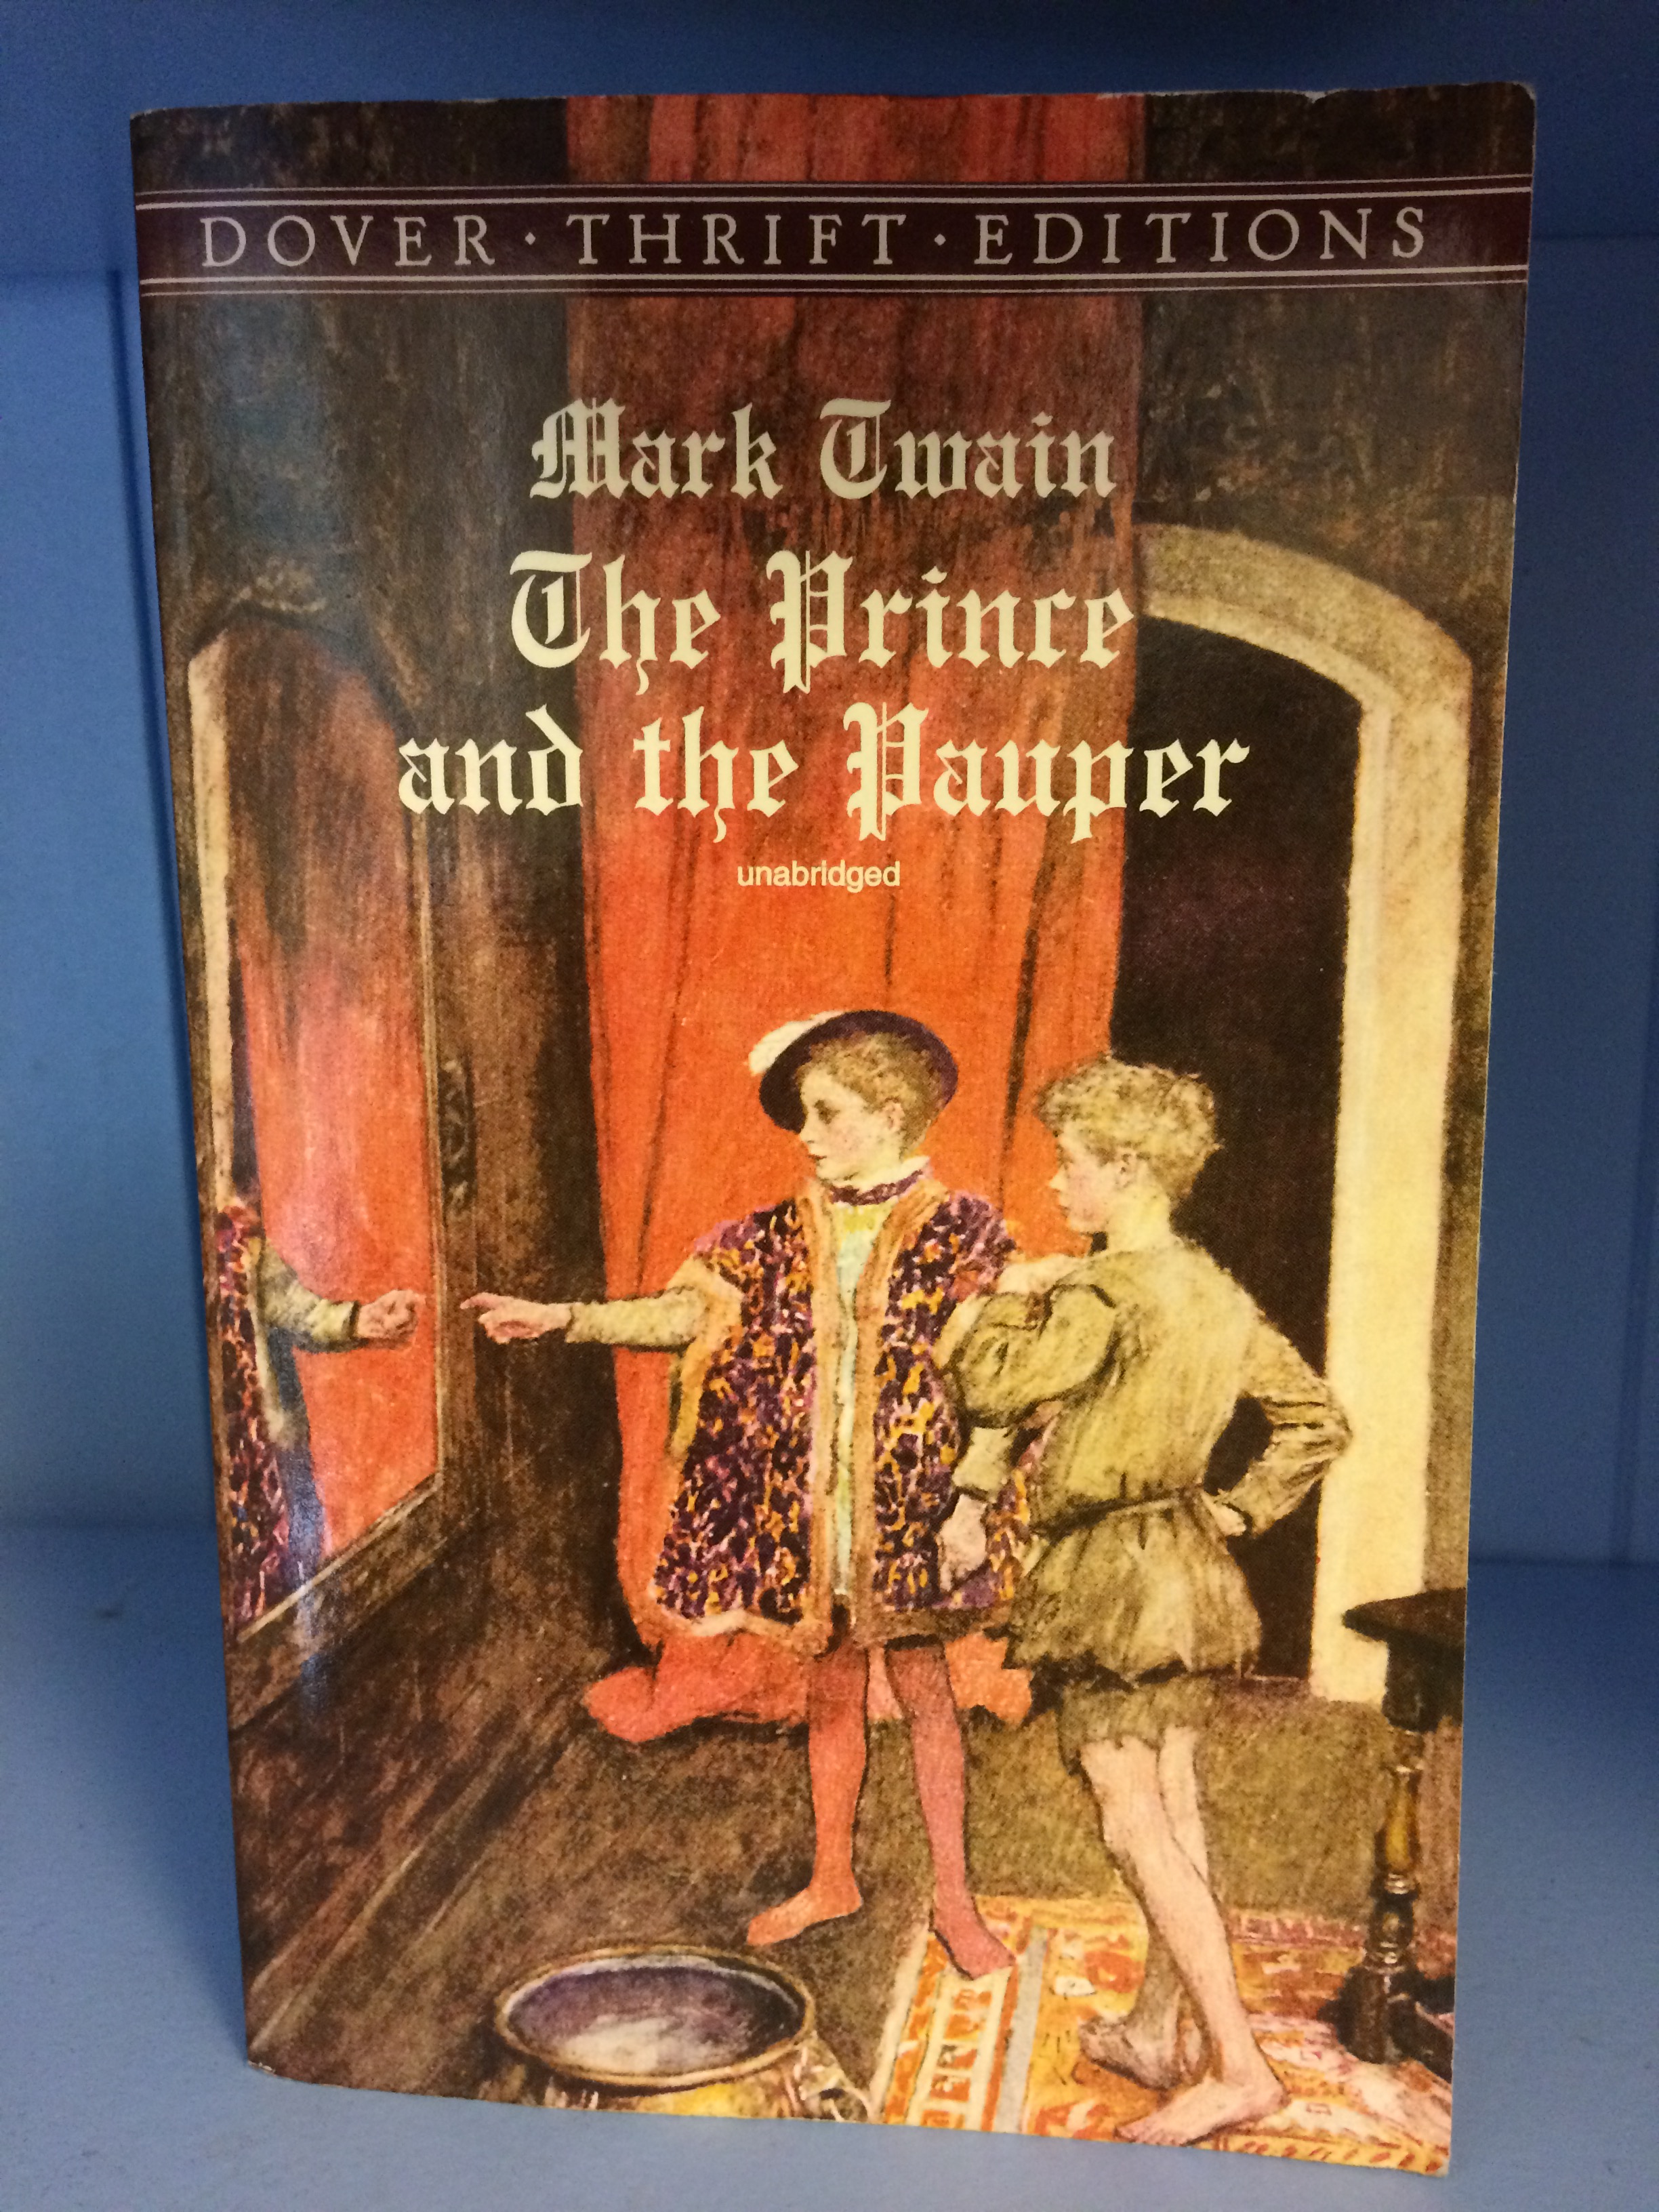 A book on a blue shelf. The text Mark Twain, The Prince and The Pauper is in a Tudor-esque font and overlaid on the image. 
The image shows two boys in front of a mirror comparing themselves. They are in the Prince's chamber. One is dressed like royalty, and the other like a pauper with bare legs.